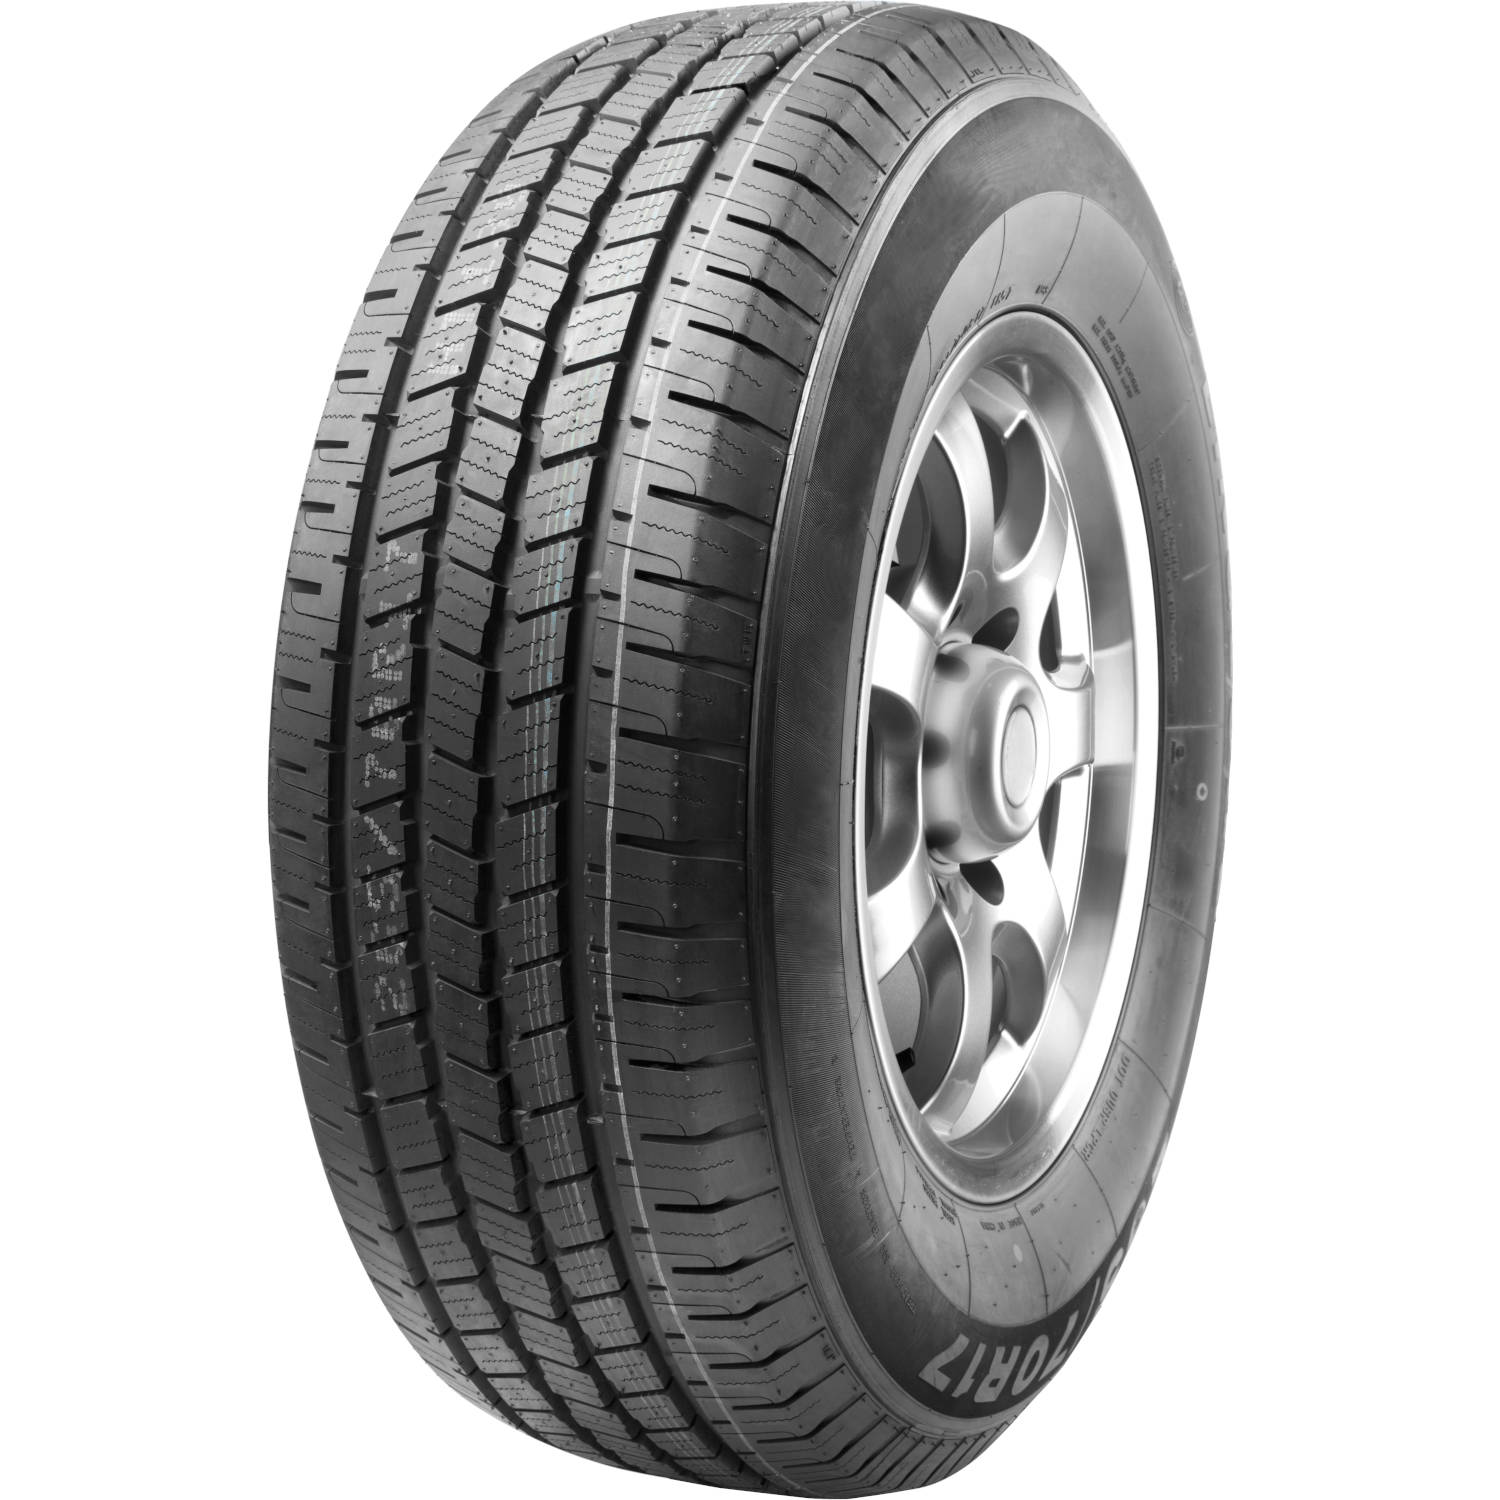 ROAD ONE CAVALRY H/T LT225/75R16 (29.3X8.9R 16) Tires